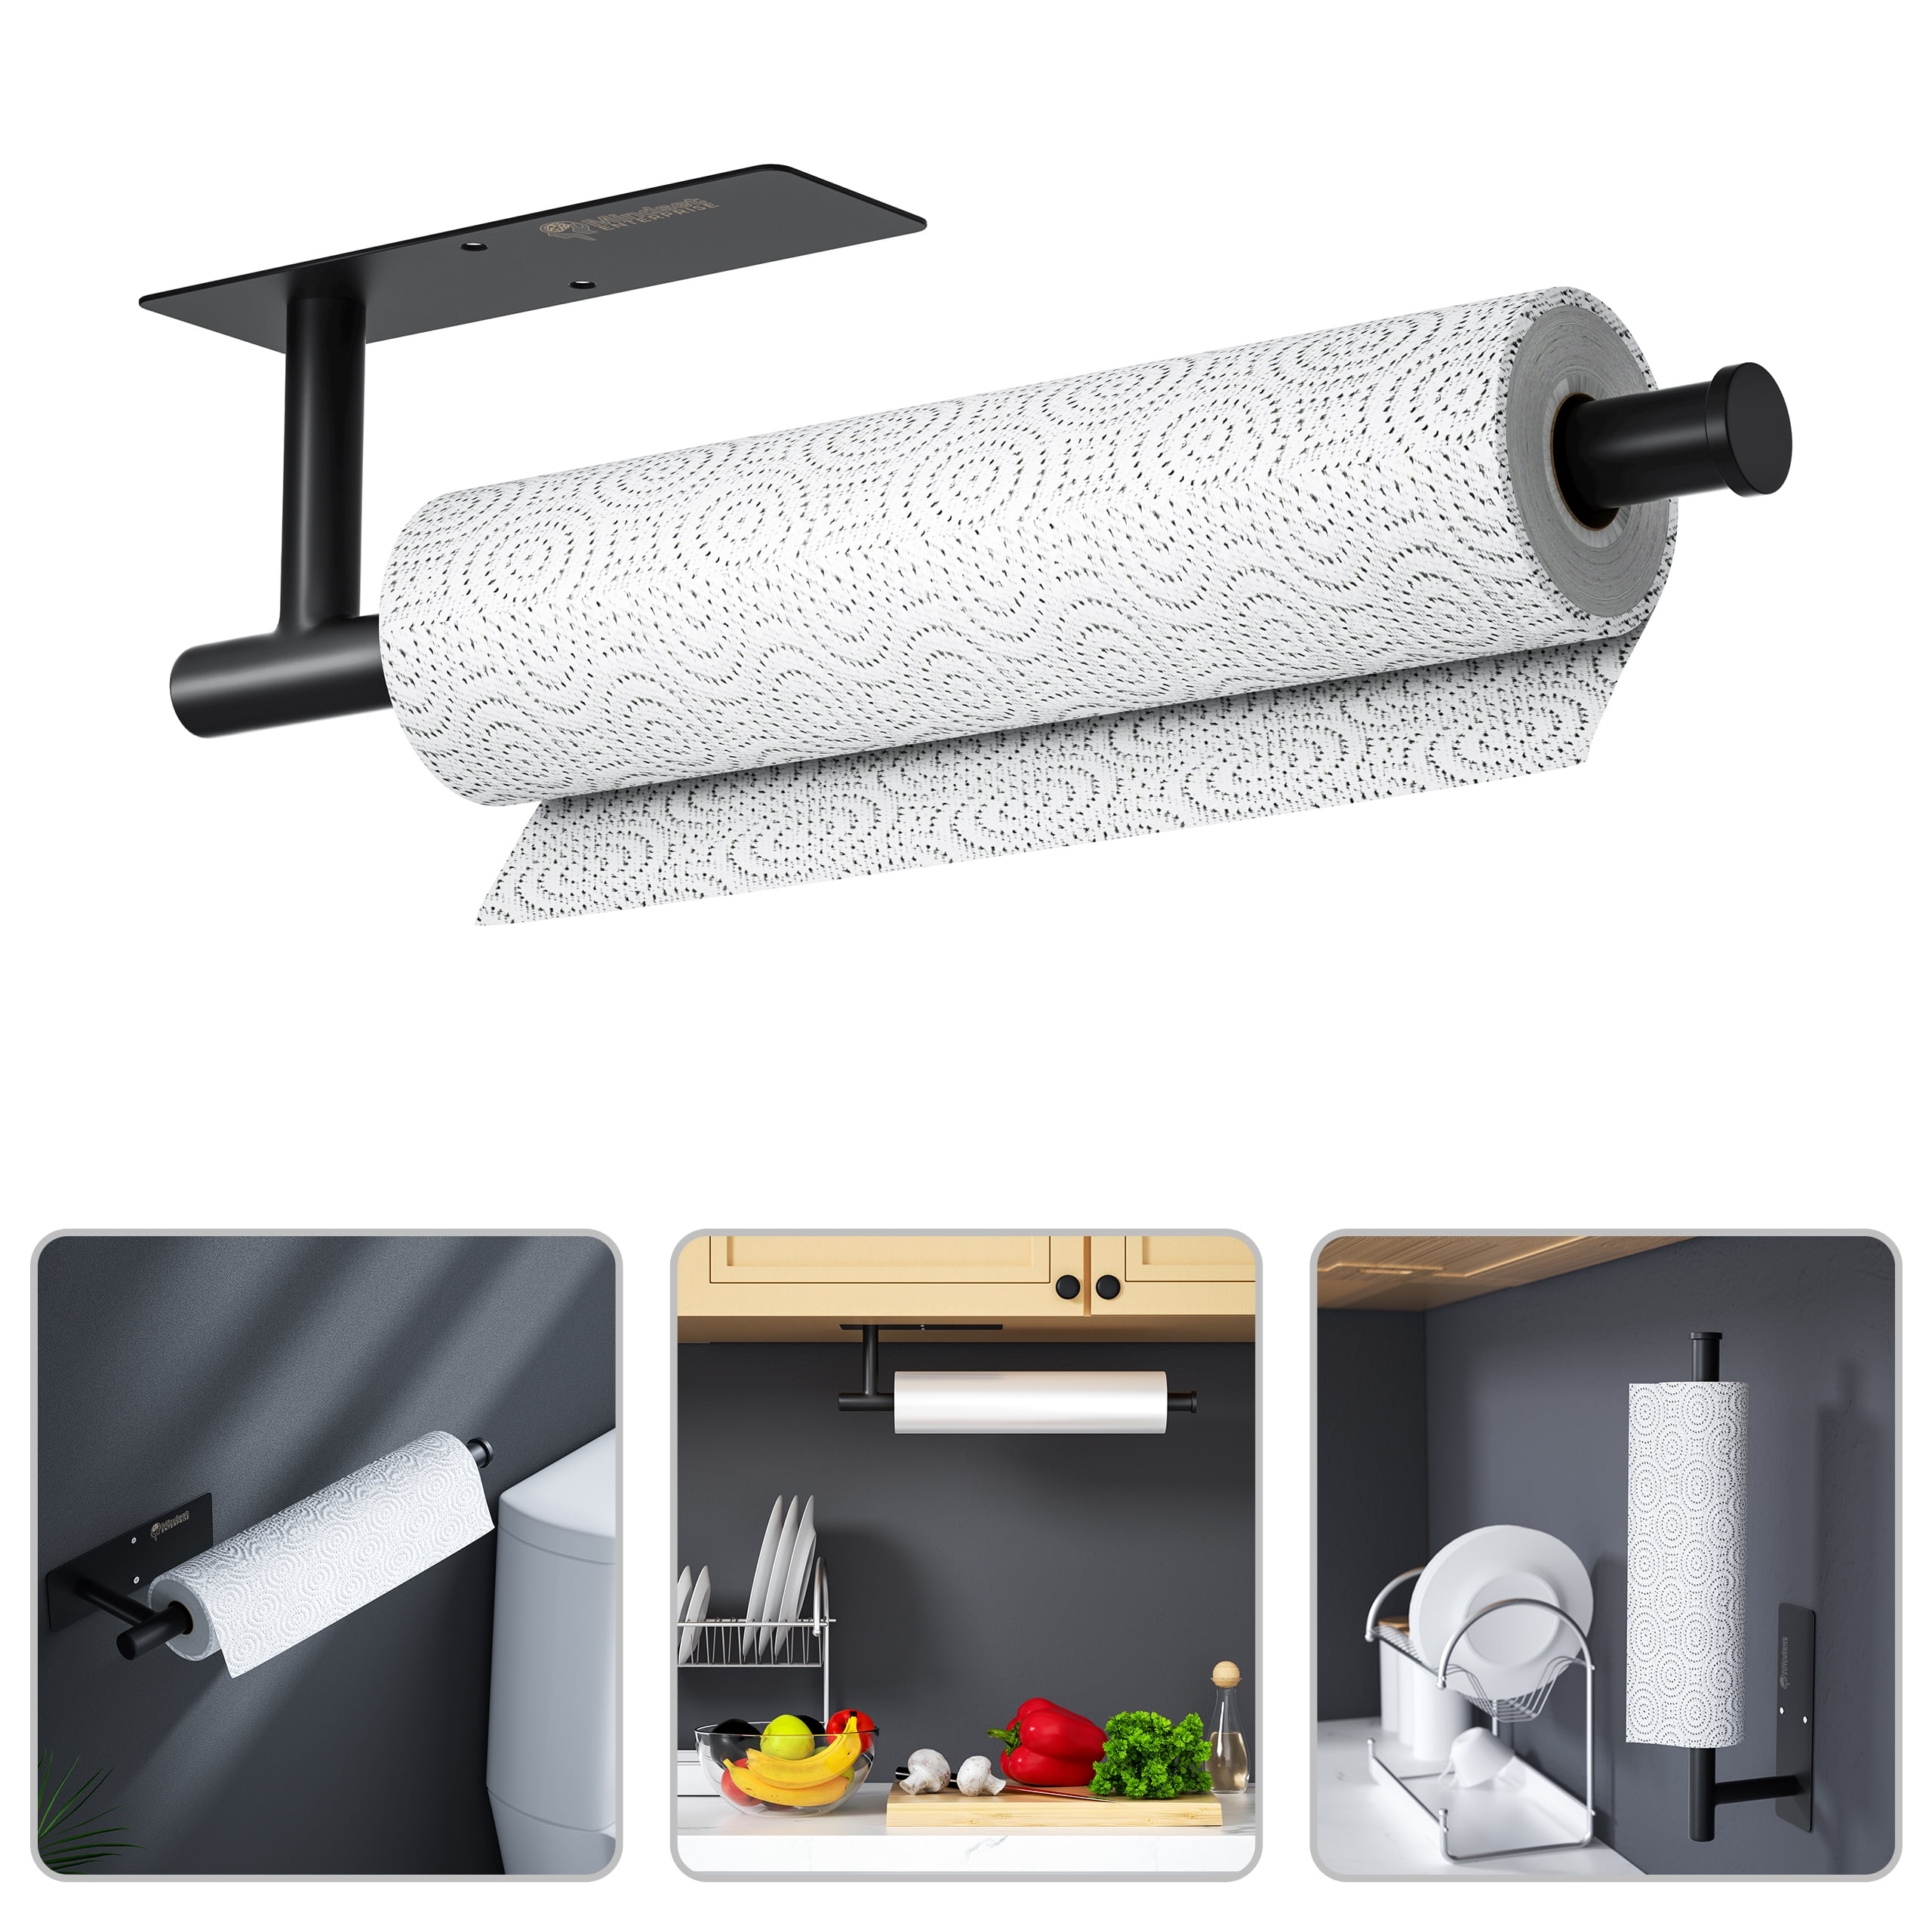 Bathroom Towel Bar Wall-Mounted Towel Holder, Easy Install with  Self-Adhesive, Premium SUS304 Stainless Steel Wall Mounted Bathroom Shelf （  No Drilling ）with Adhesive Storage Organizer for Toilet Dorm and Kitchen